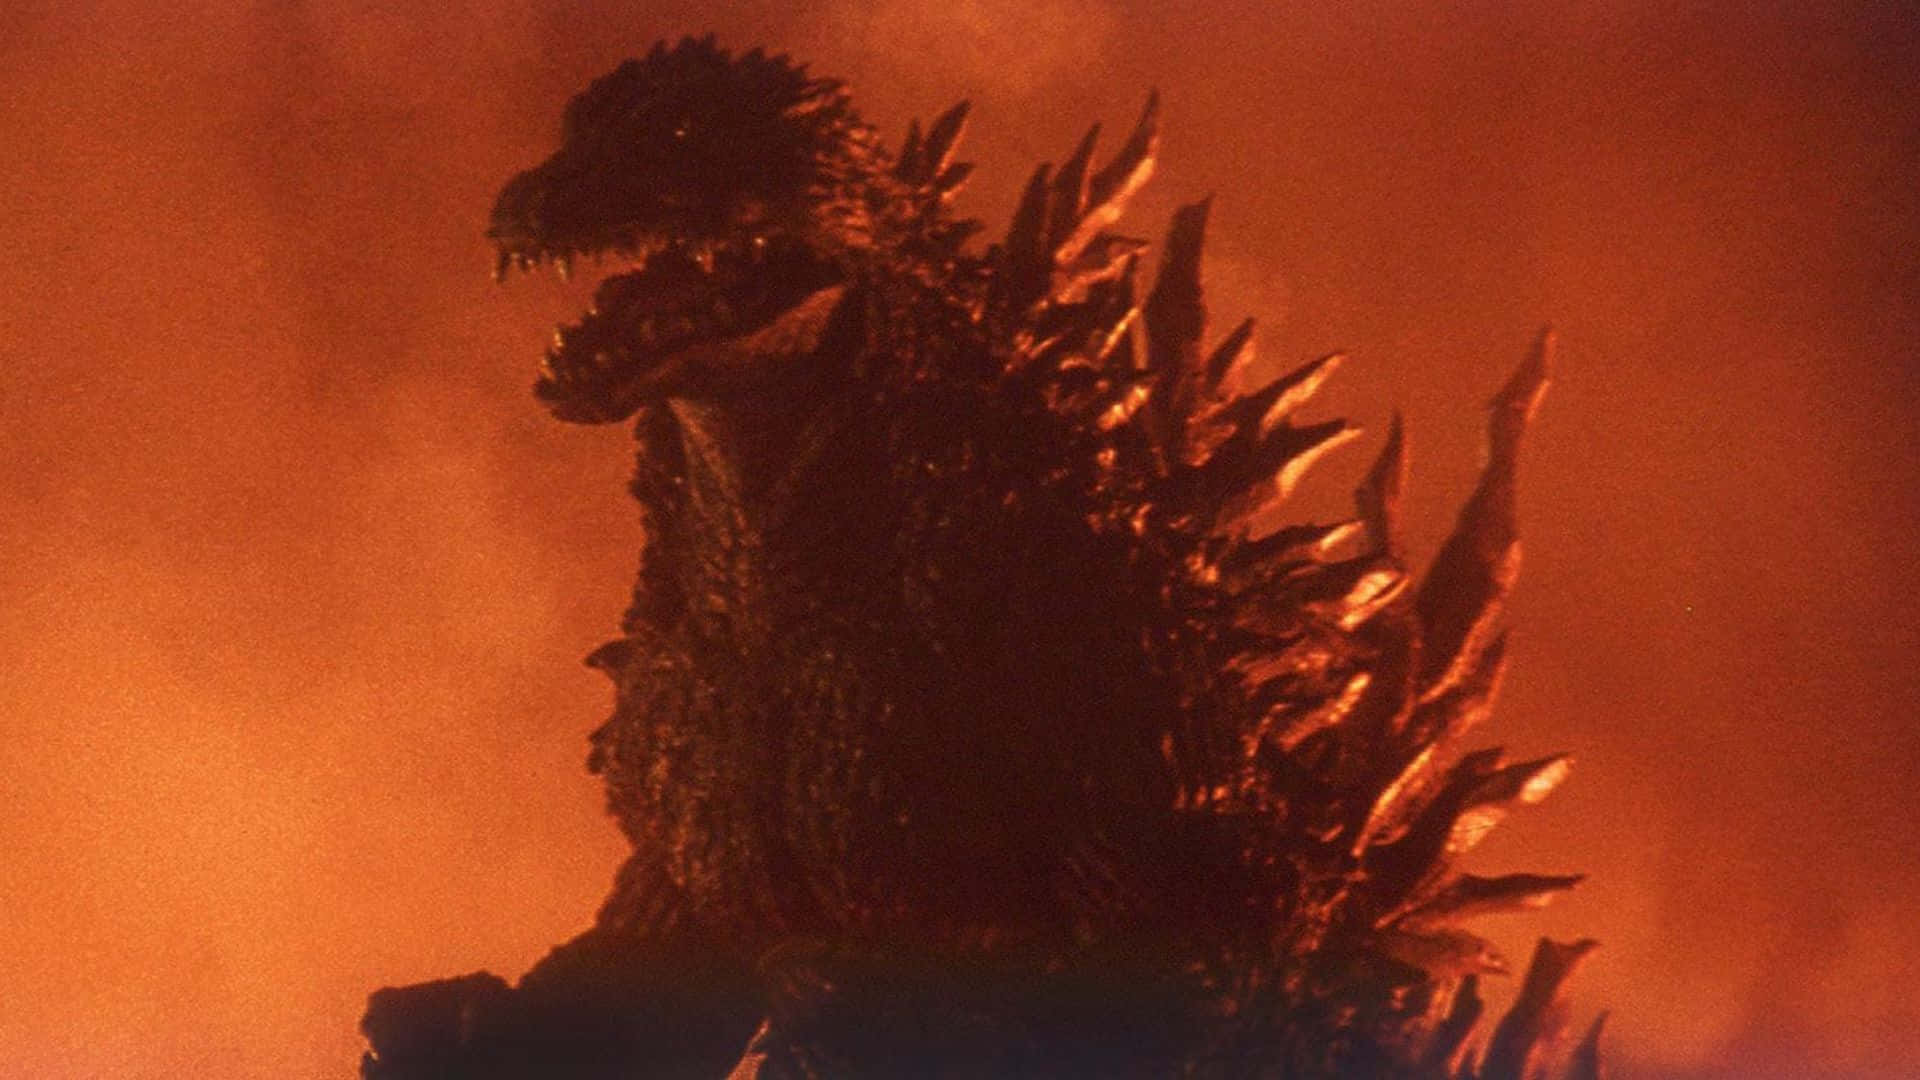 Godzilla 2000 Unleashed in the City Wallpaper